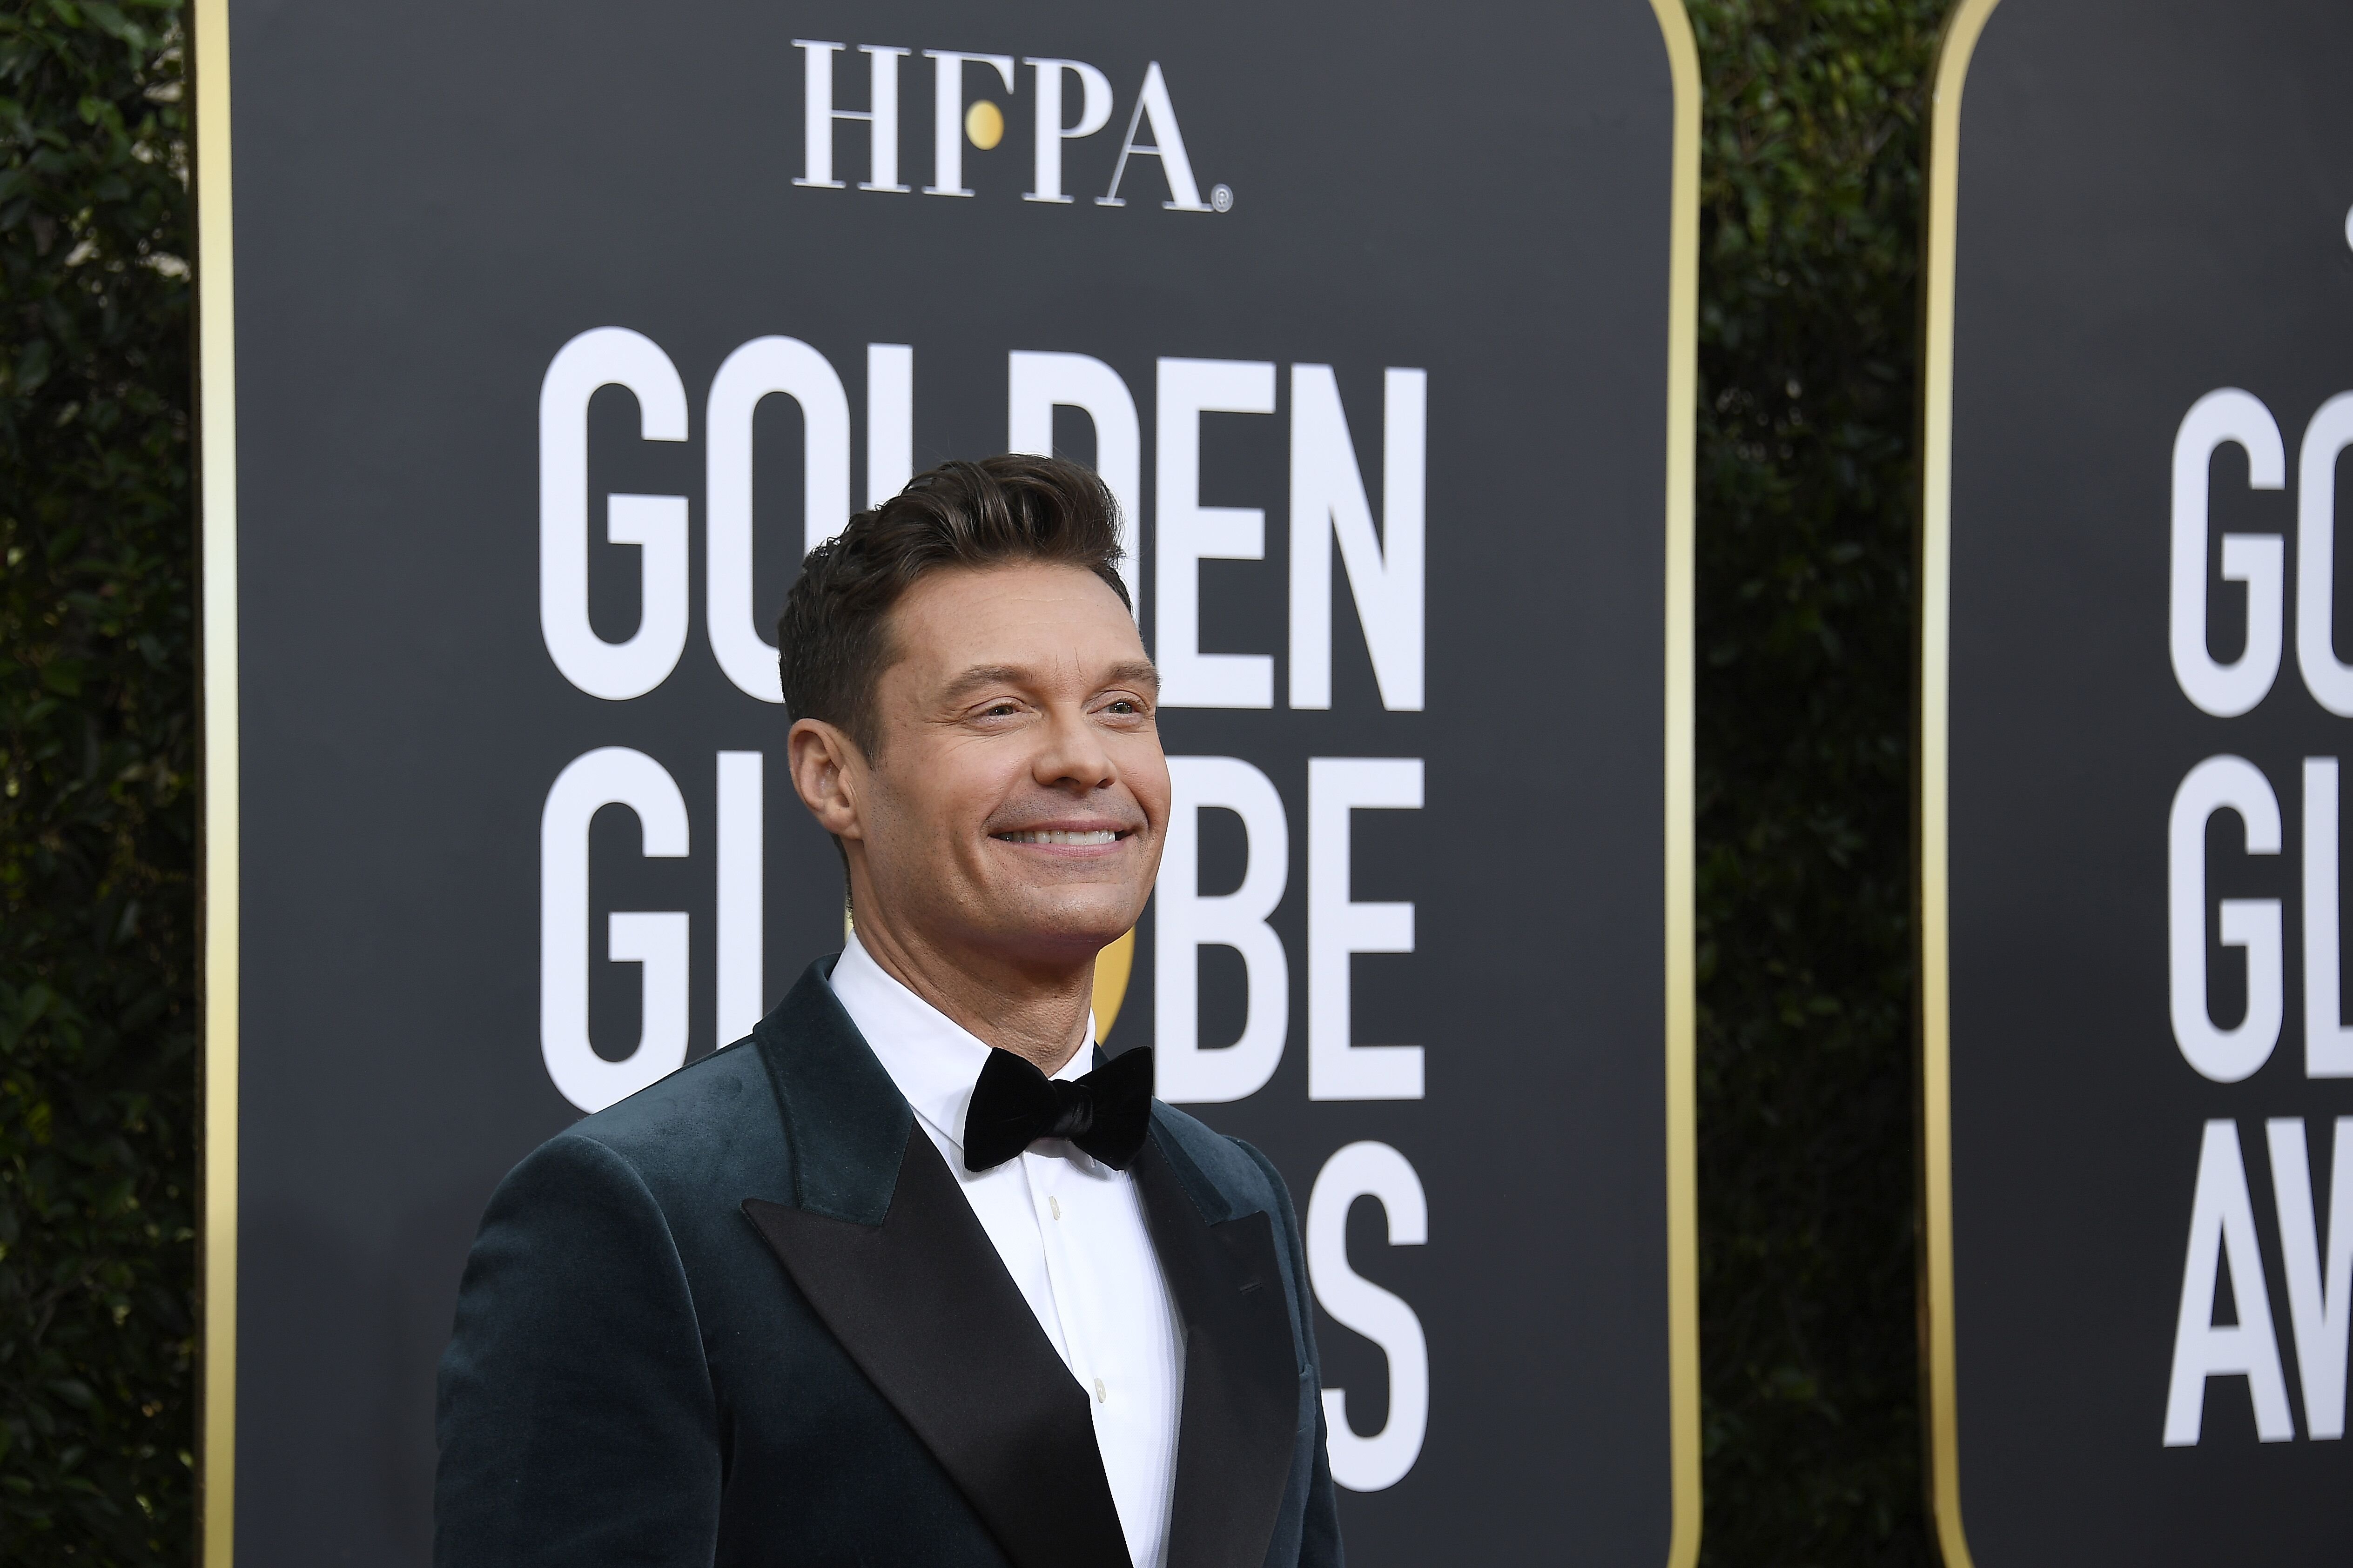 Ryan Seacrest arrives to the 77th Annual Golden Globe Awards held at the Beverly Hilton Hotel on January 5, 2020. | Source: Getty Images